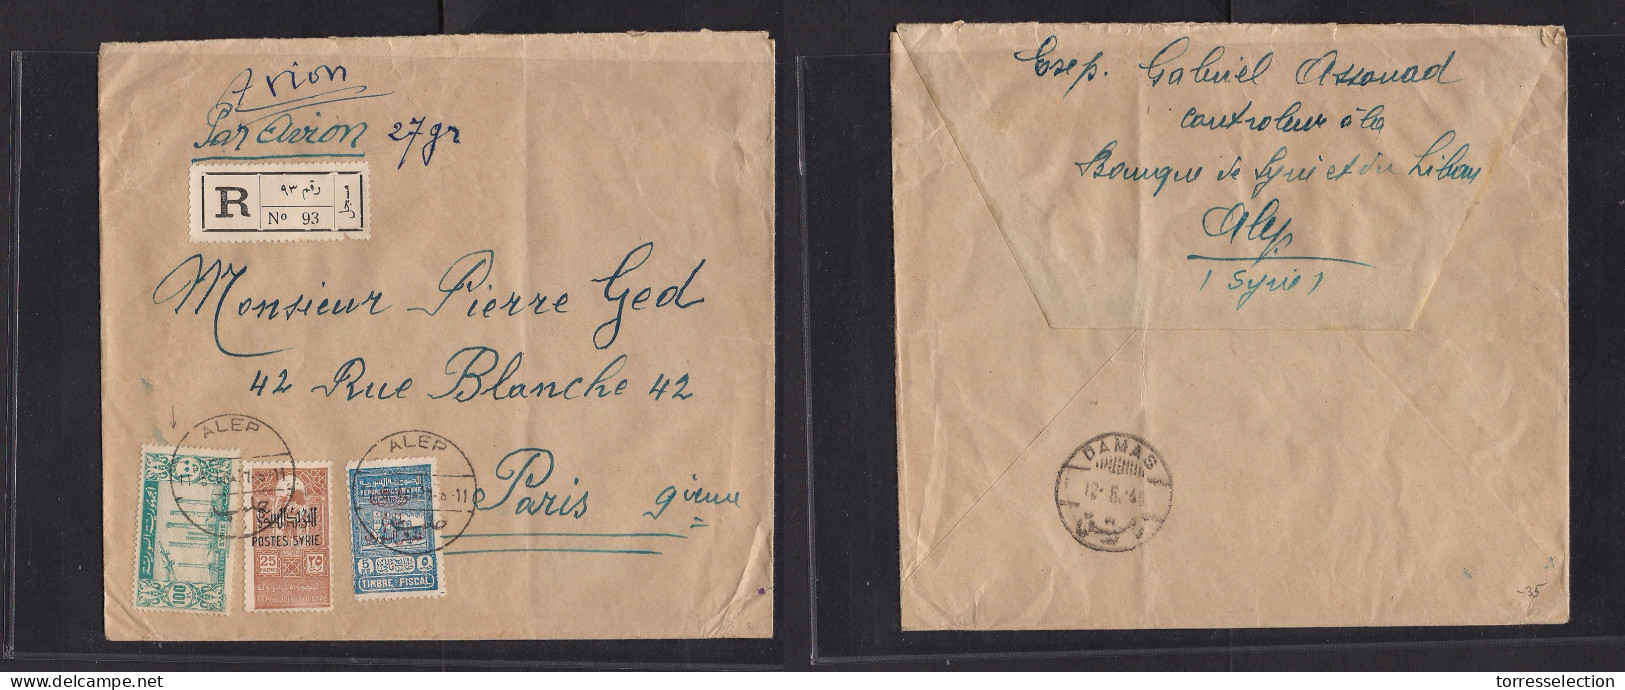 SYRIA. 1946 (11 May) Alep - France, Paris. Via Damas. Registered Air Multifkd Mixed Issues Envelope Incl Provisional Pos - Syrie